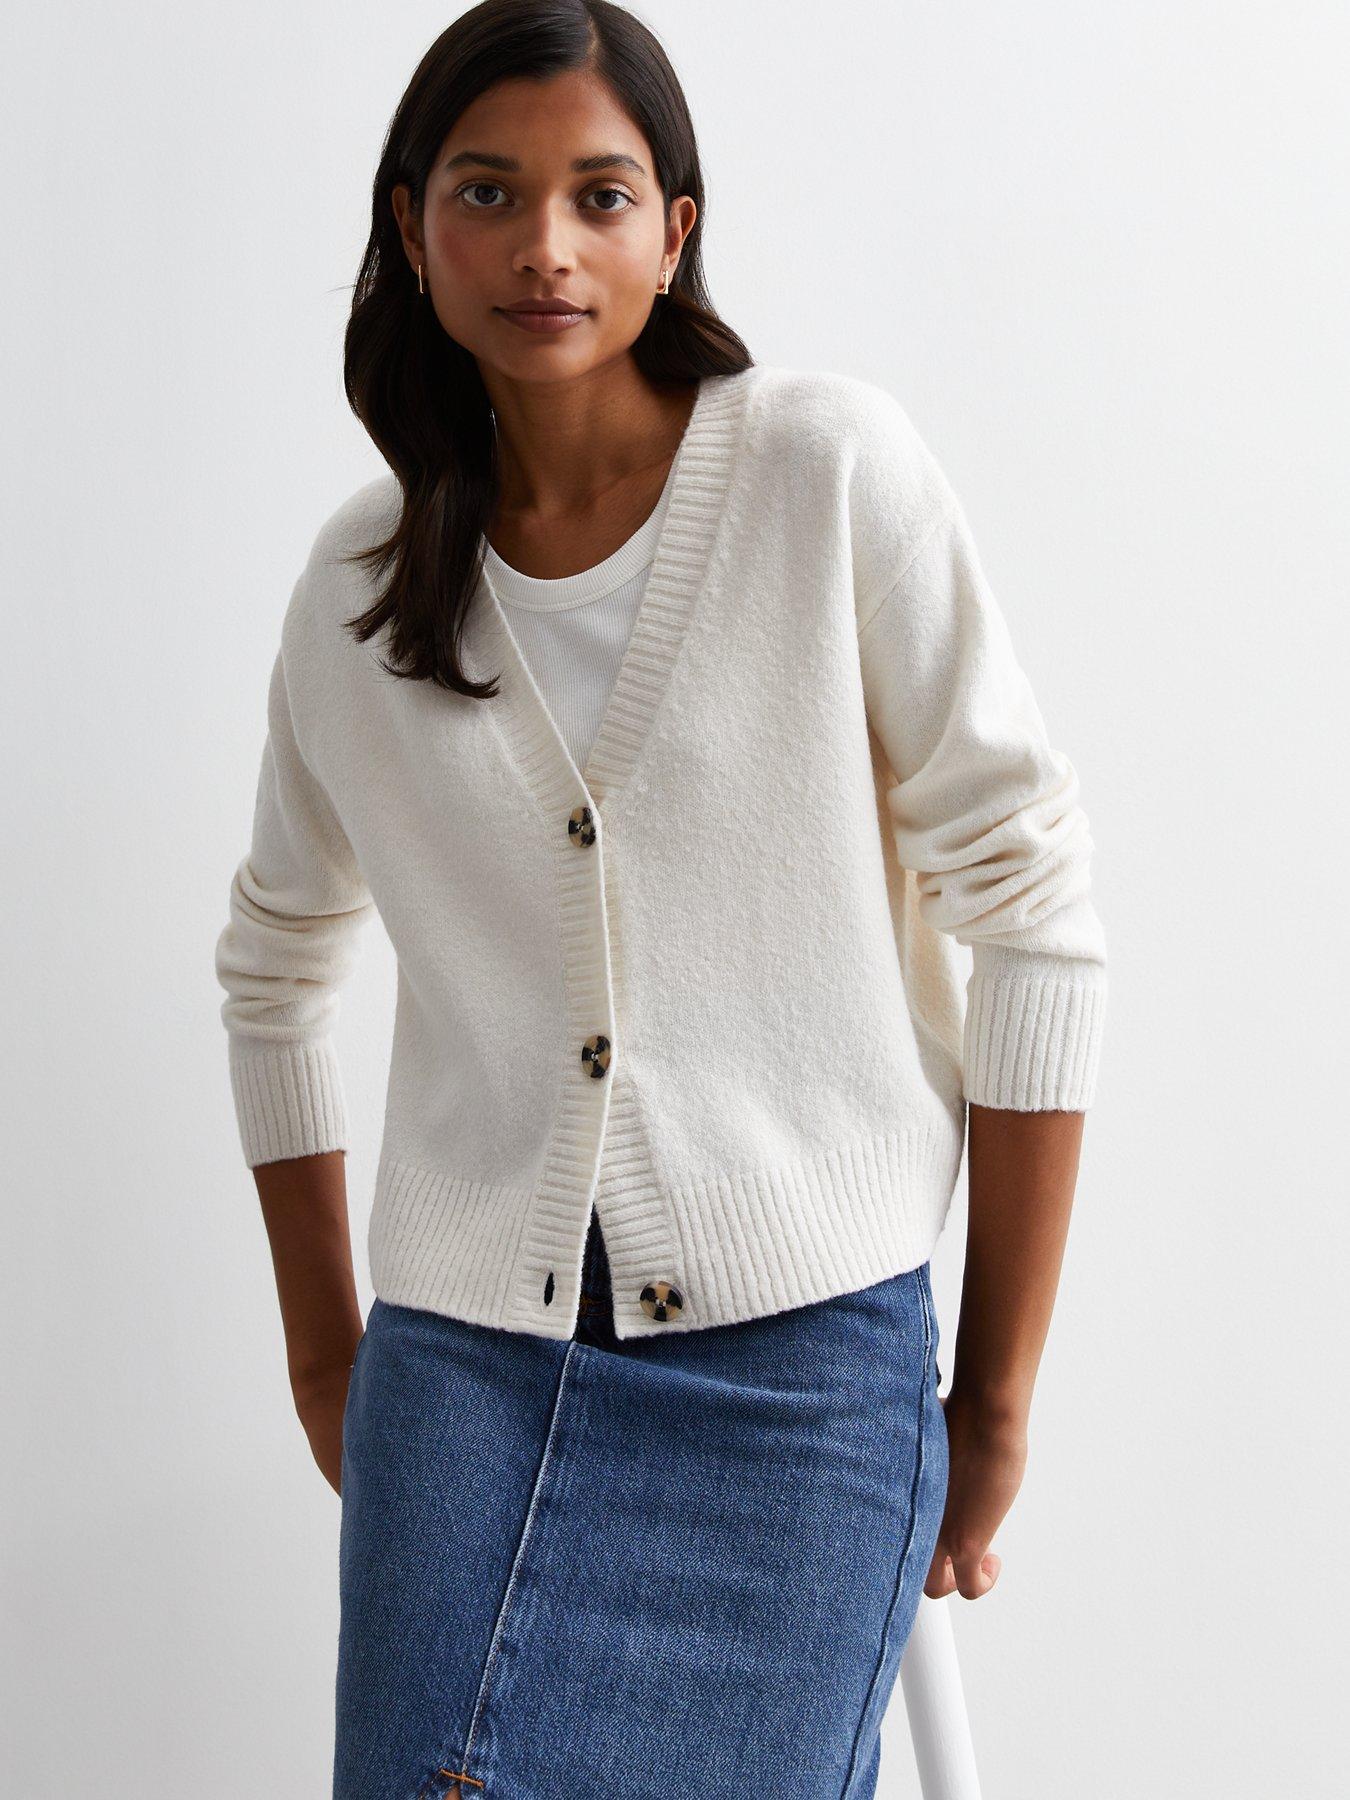 New Look Off White Knit Button Front Cardigan | very.co.uk